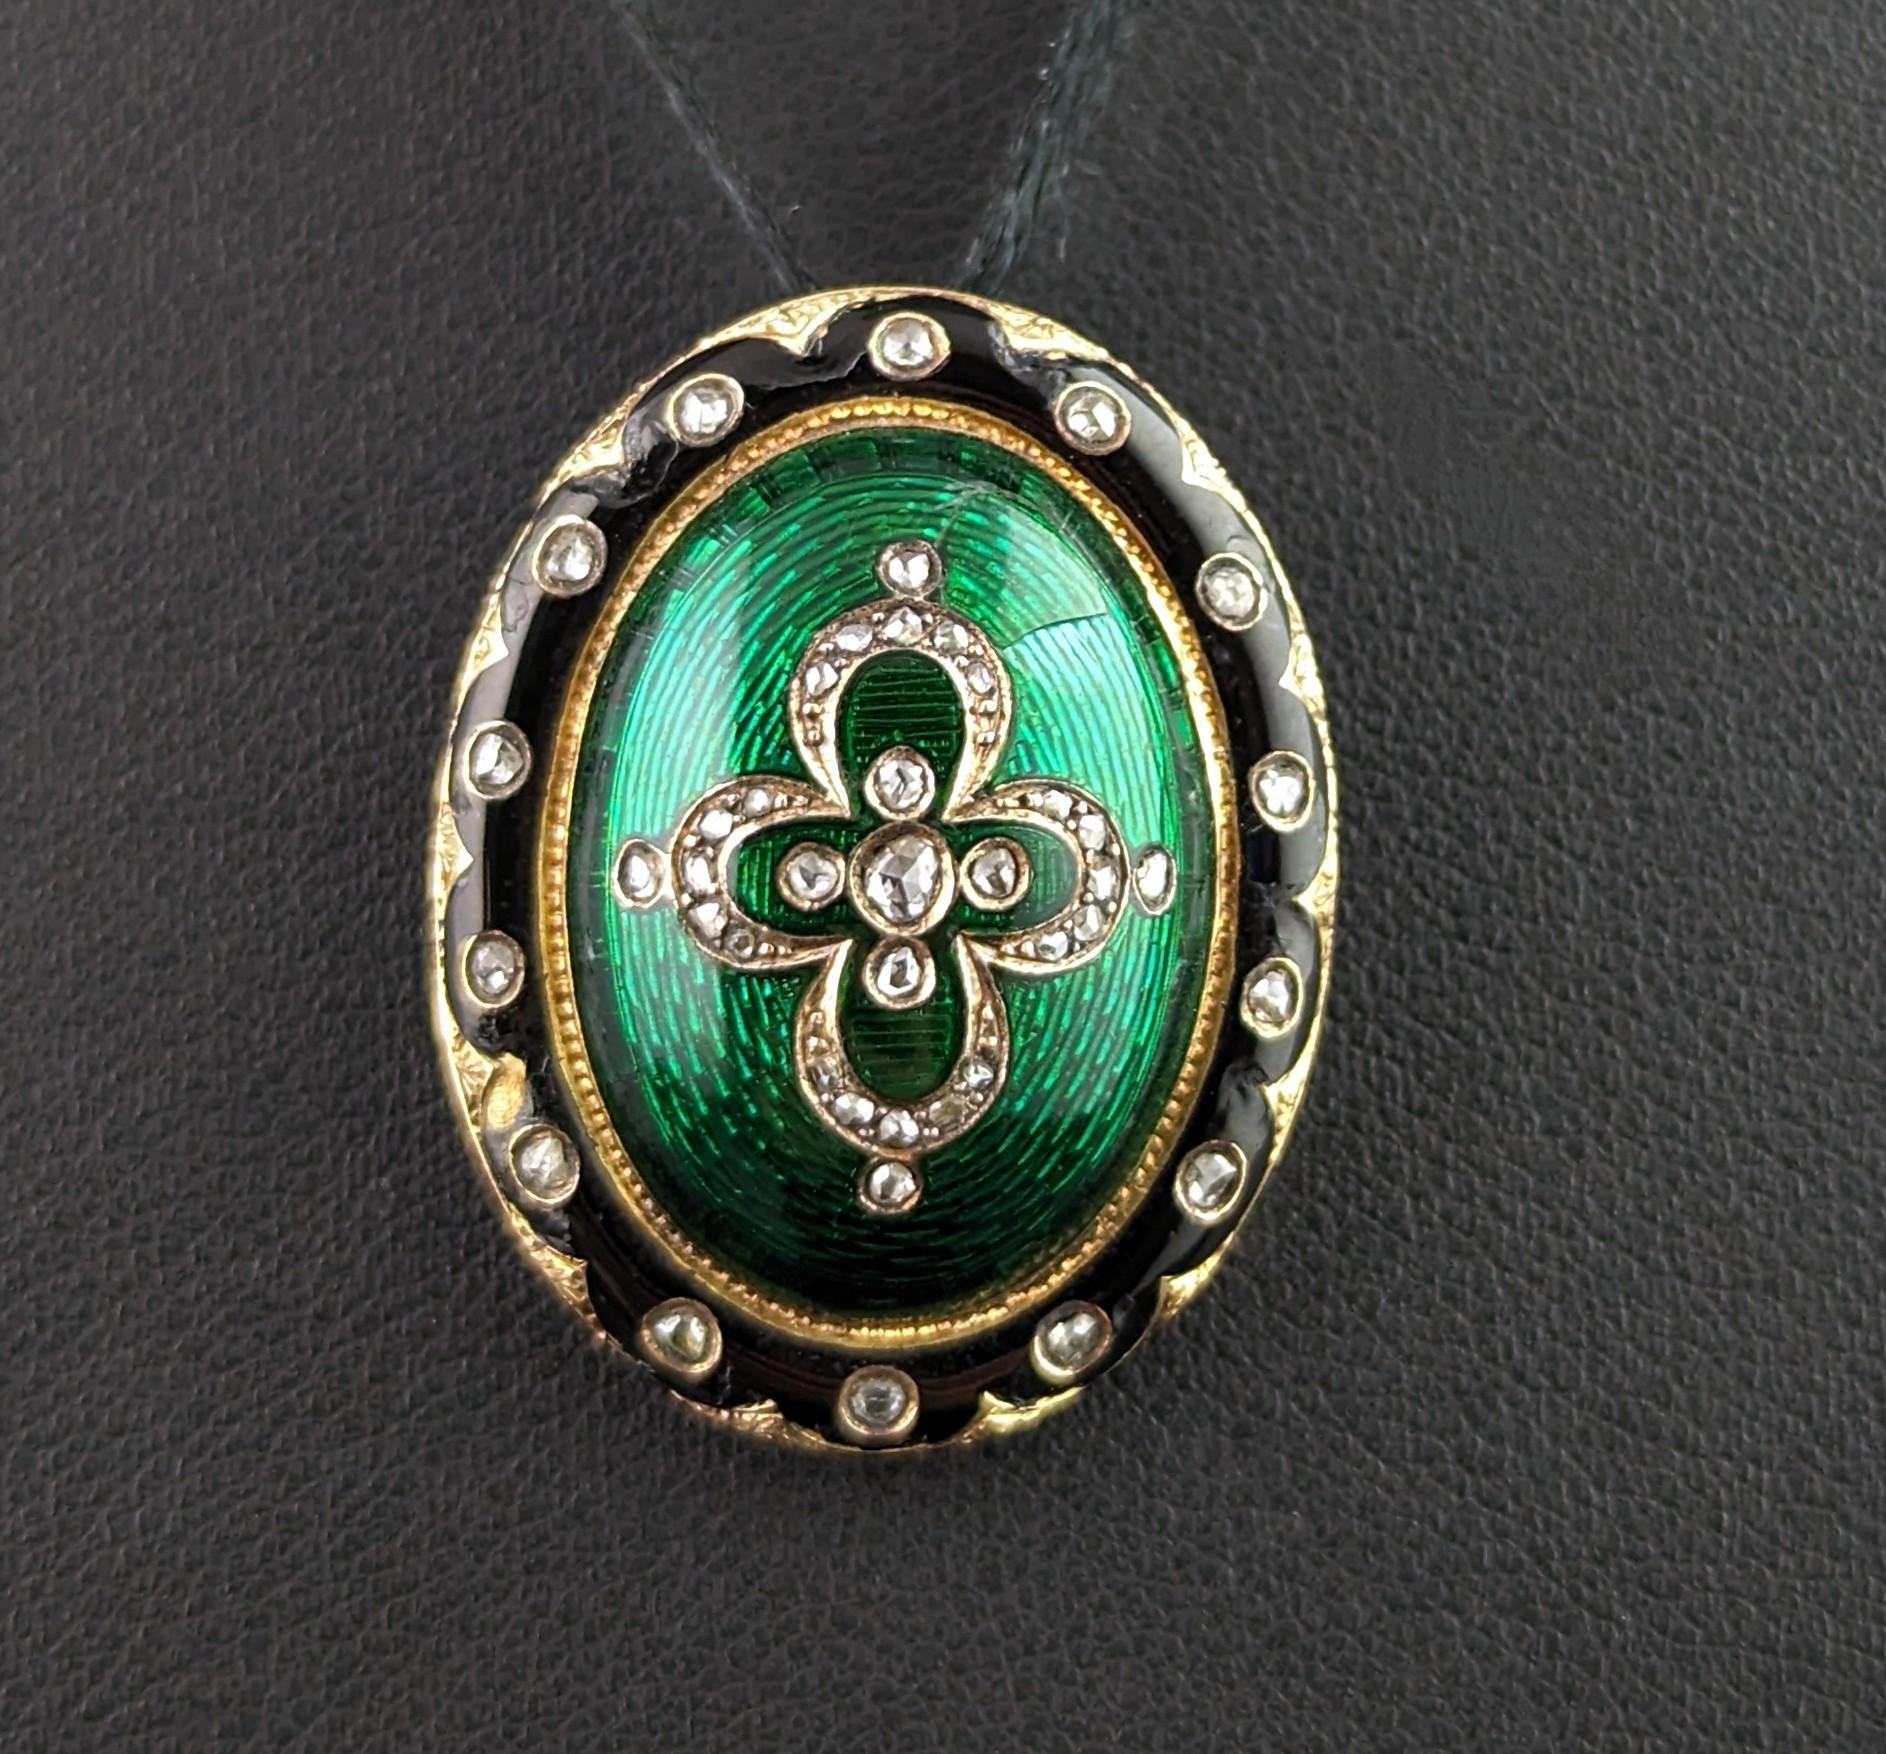 This beautifully crafted Victorian pendant is really something else!

A true beauty which features a combination of rich green guilloche enamel, black enamel and 18ct gold, highlighted by a rose cut diamonds.

The outer edge of the pendant is